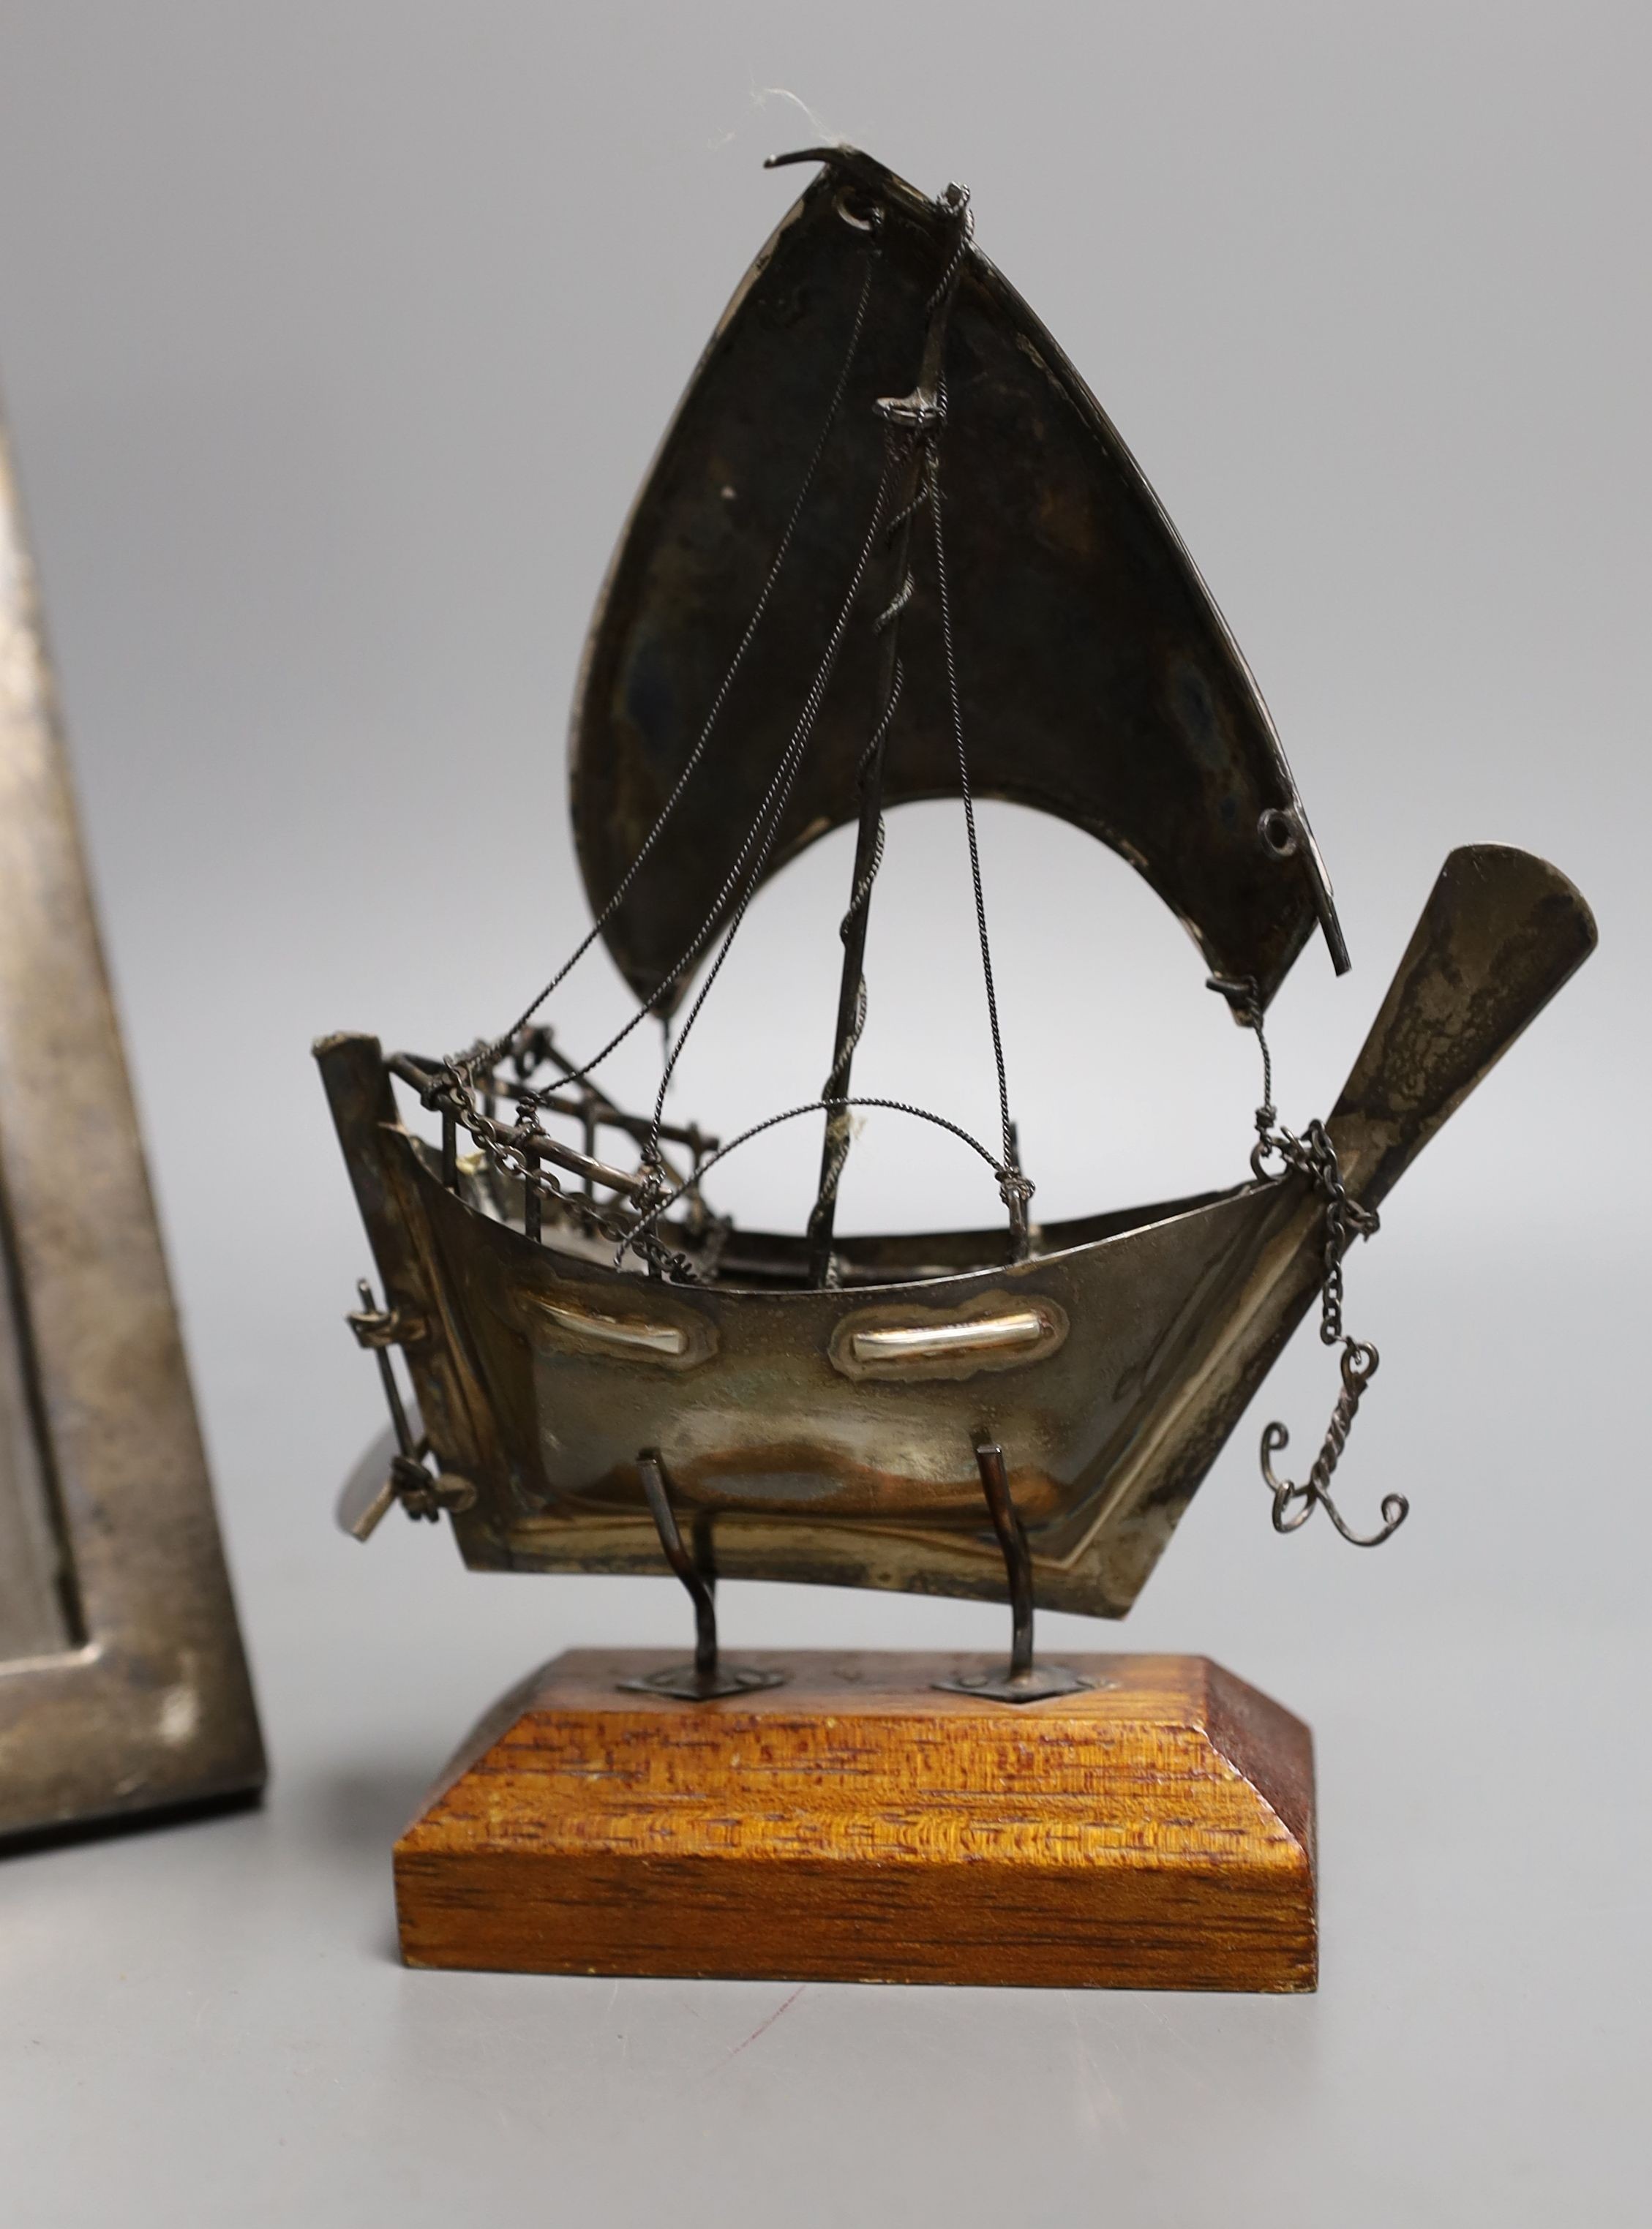 A George V silver mounted rectangular photograph frame, 24.2cm, a 1930's silver trinket box and a miniature white metal model of a sail boat, on wooden stand.